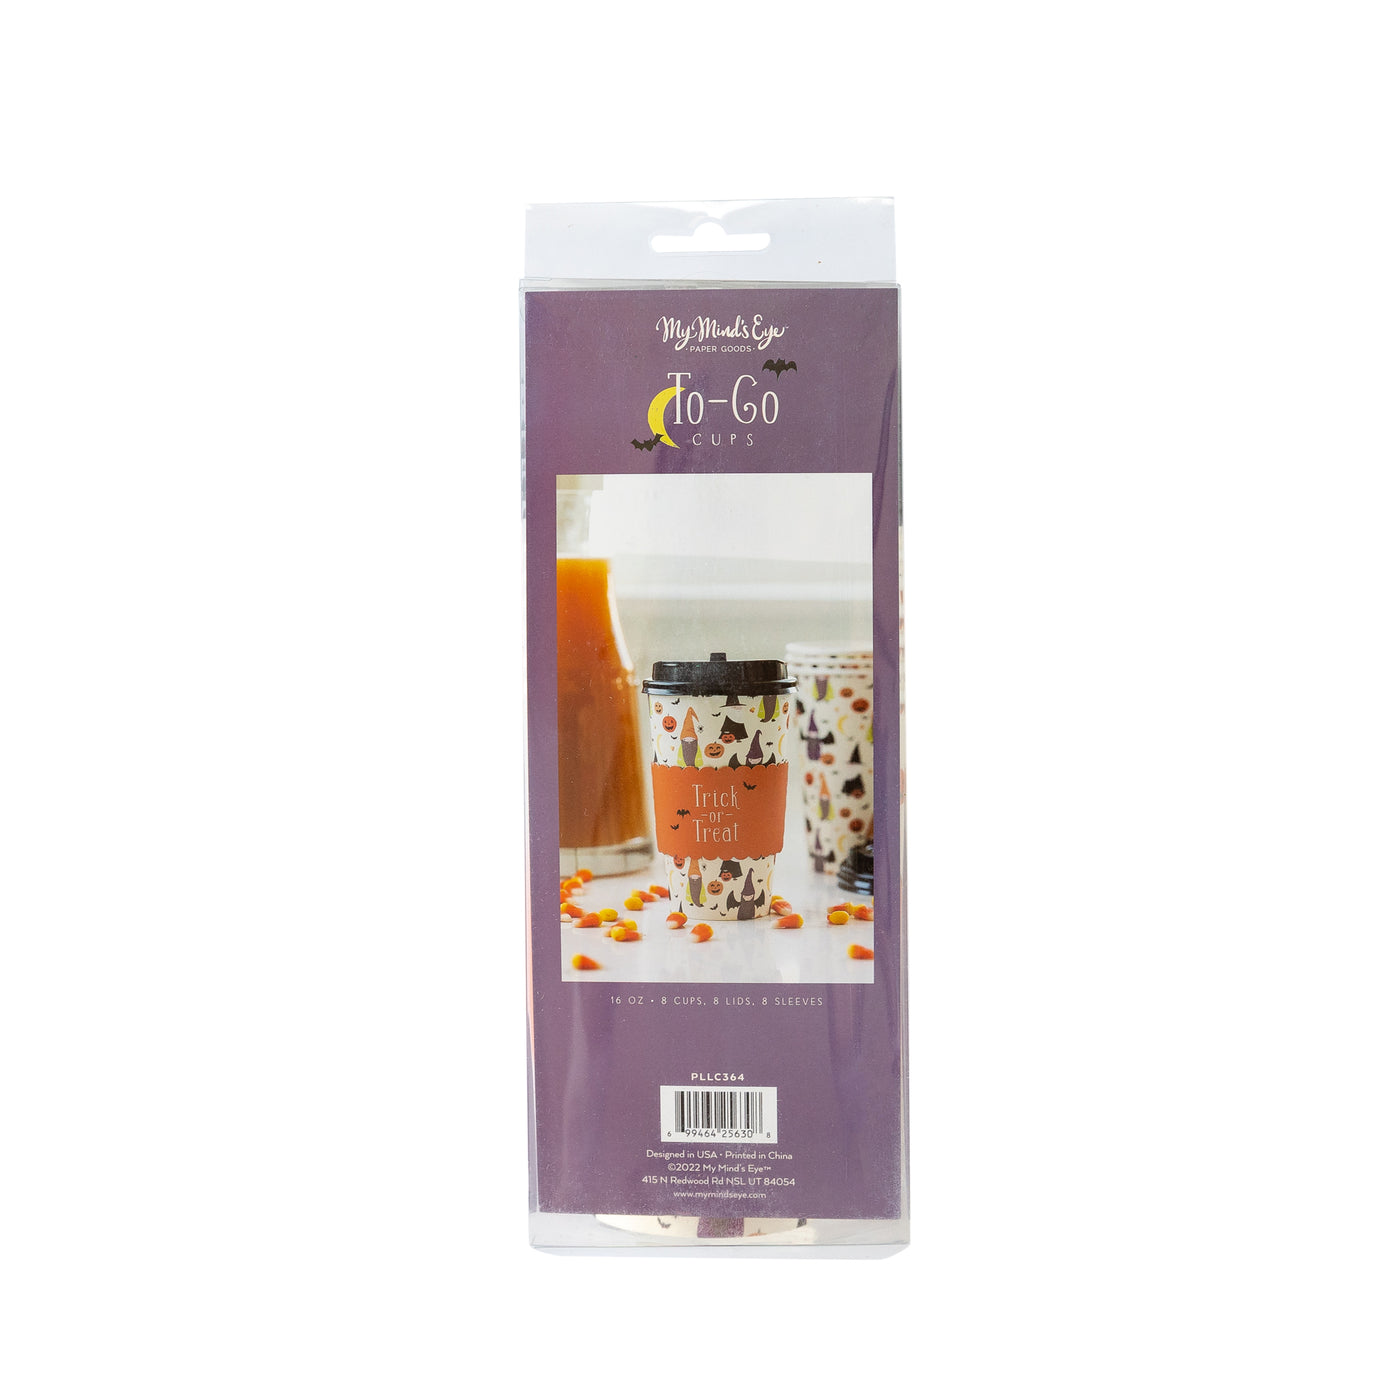 Trick or Treat Costumes To-Go Cups (8ct - 16oz)